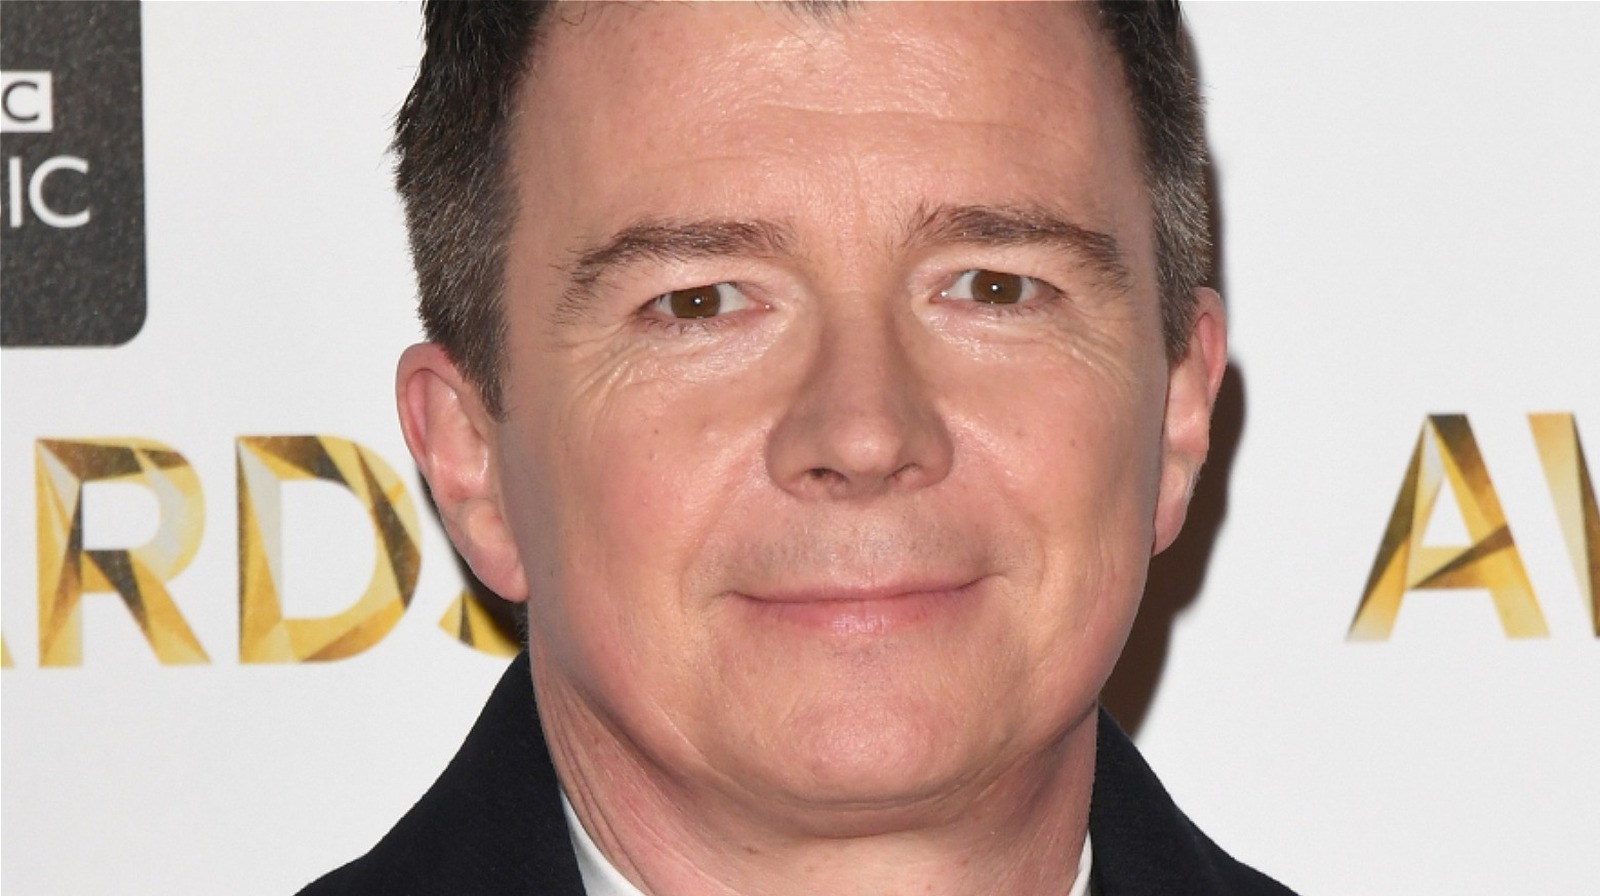 Rick Astley's Craft Beer Bar Is Never Gonna Let You Down - Jk, It Might